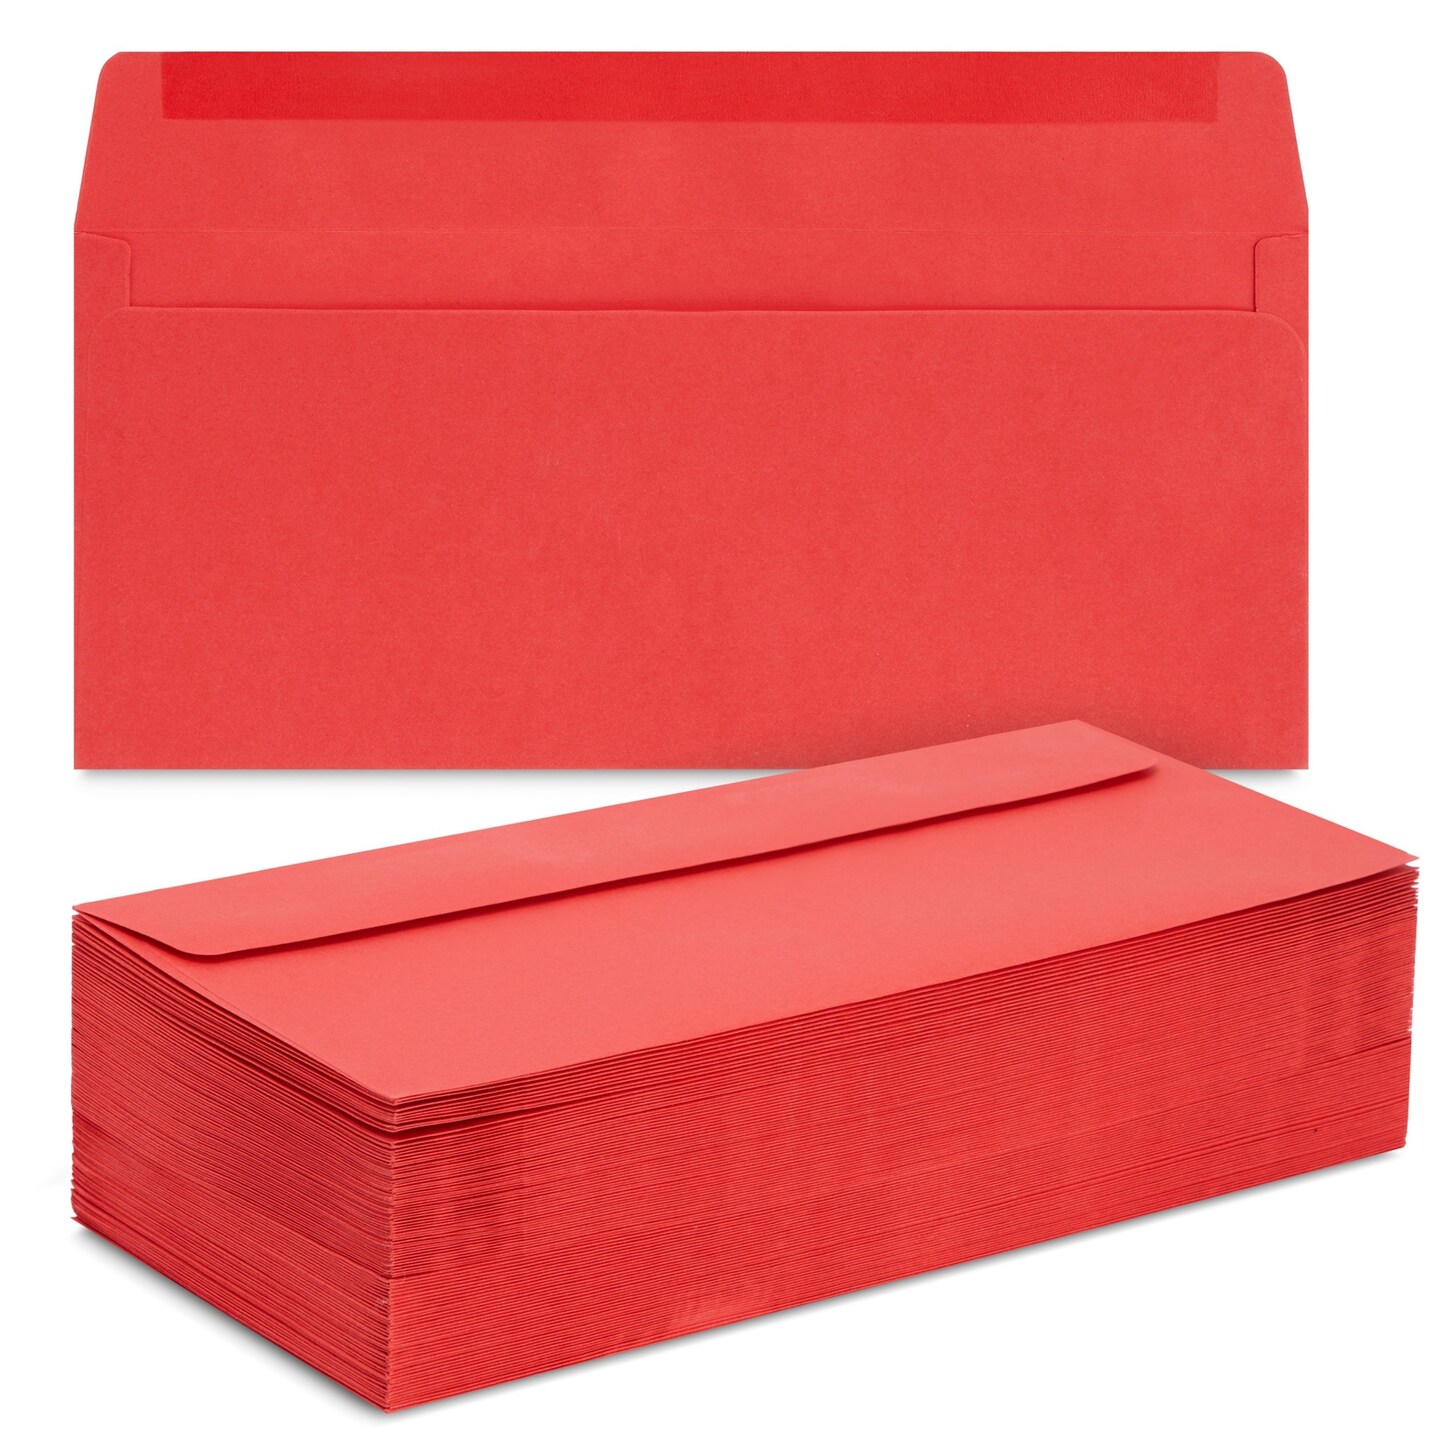 100 Pack #10 Red Envelopes with Square Flap for Mailing Letters, Invitations (4 1/8 x 9 1/2 In)